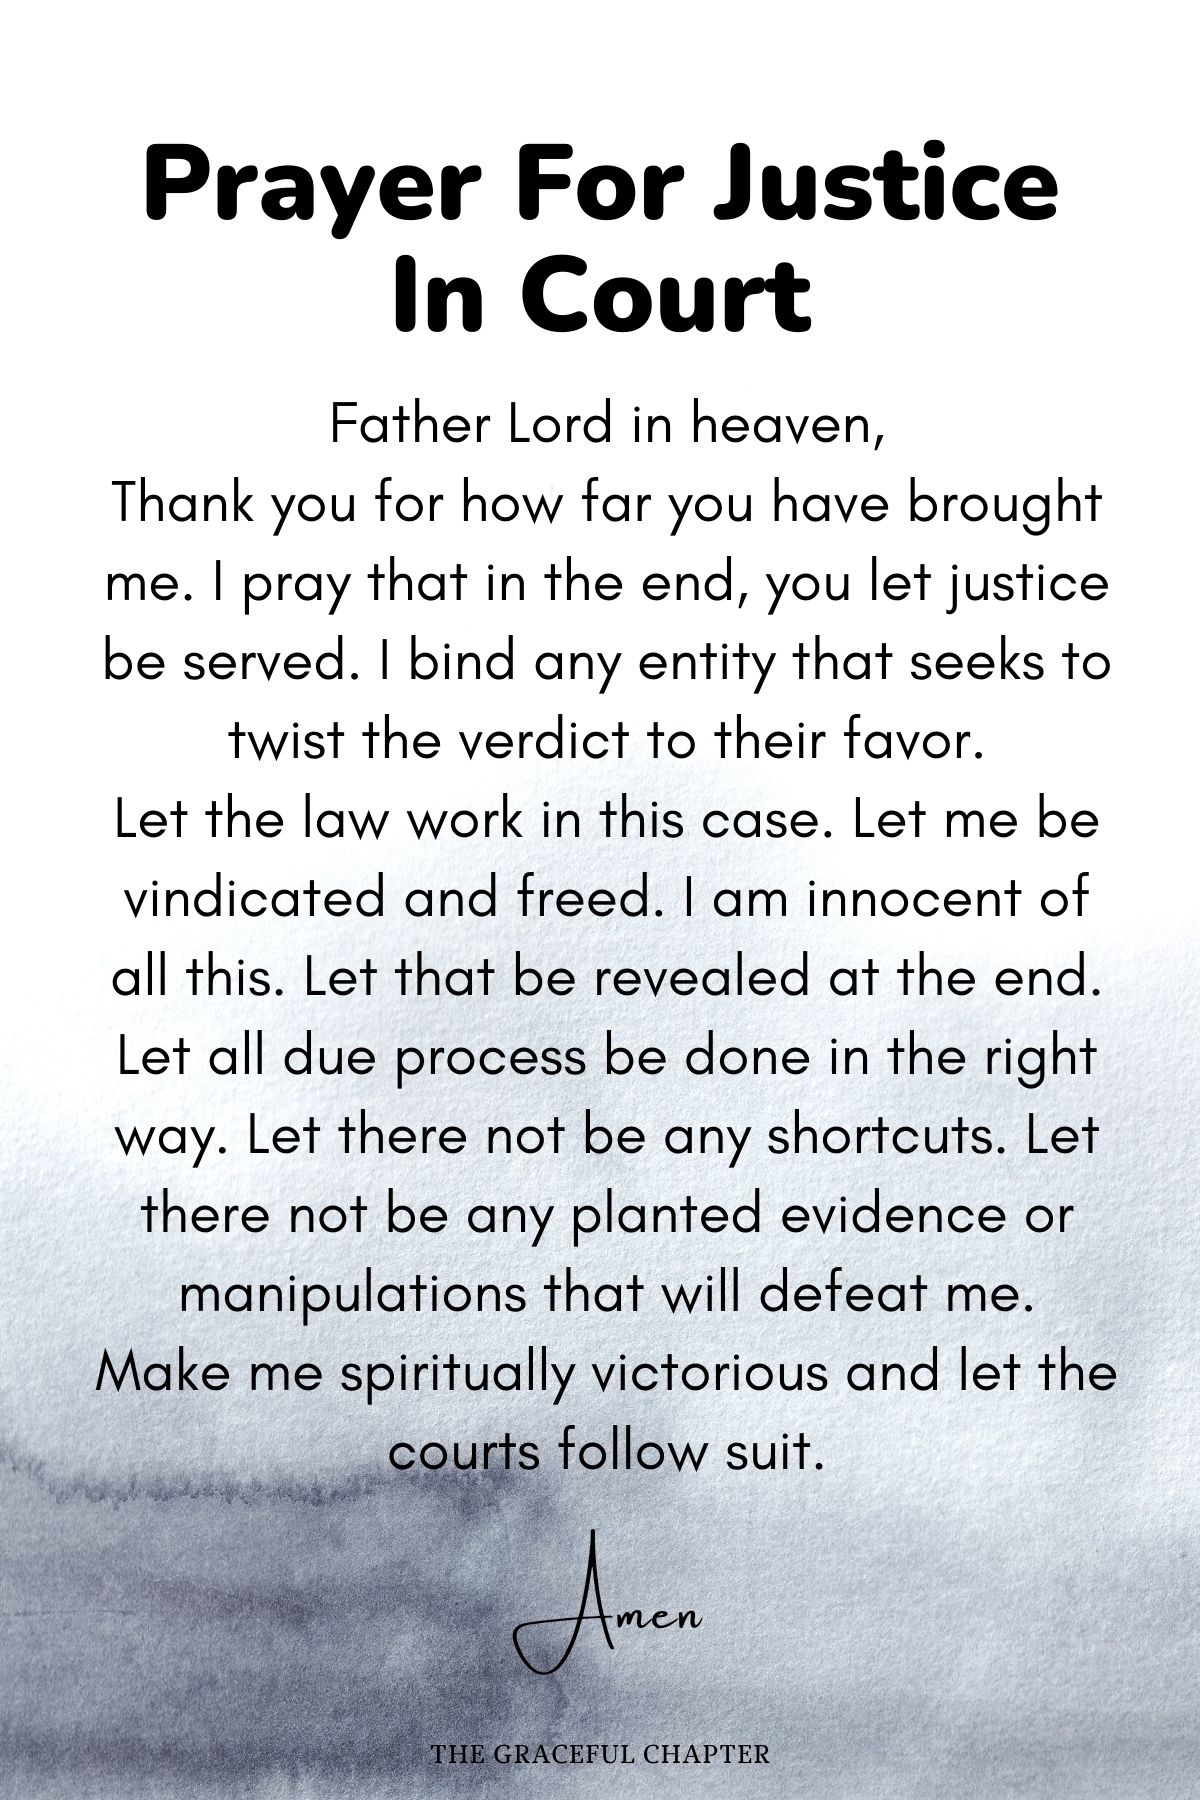 Prayer for justice in court